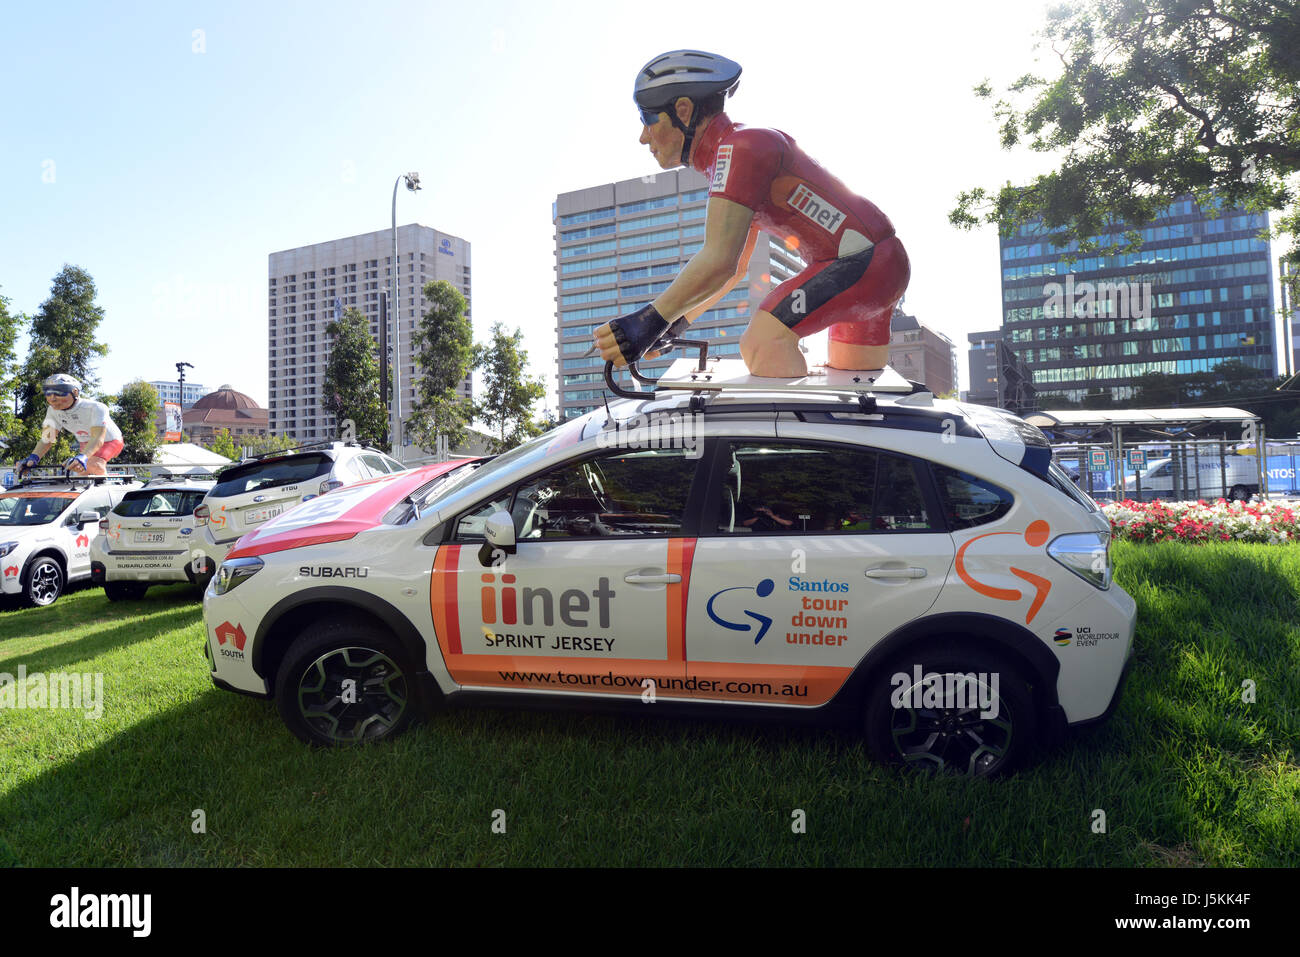 Festivity and events during the Tour down under in Adelaide, Australia. Stock Photo